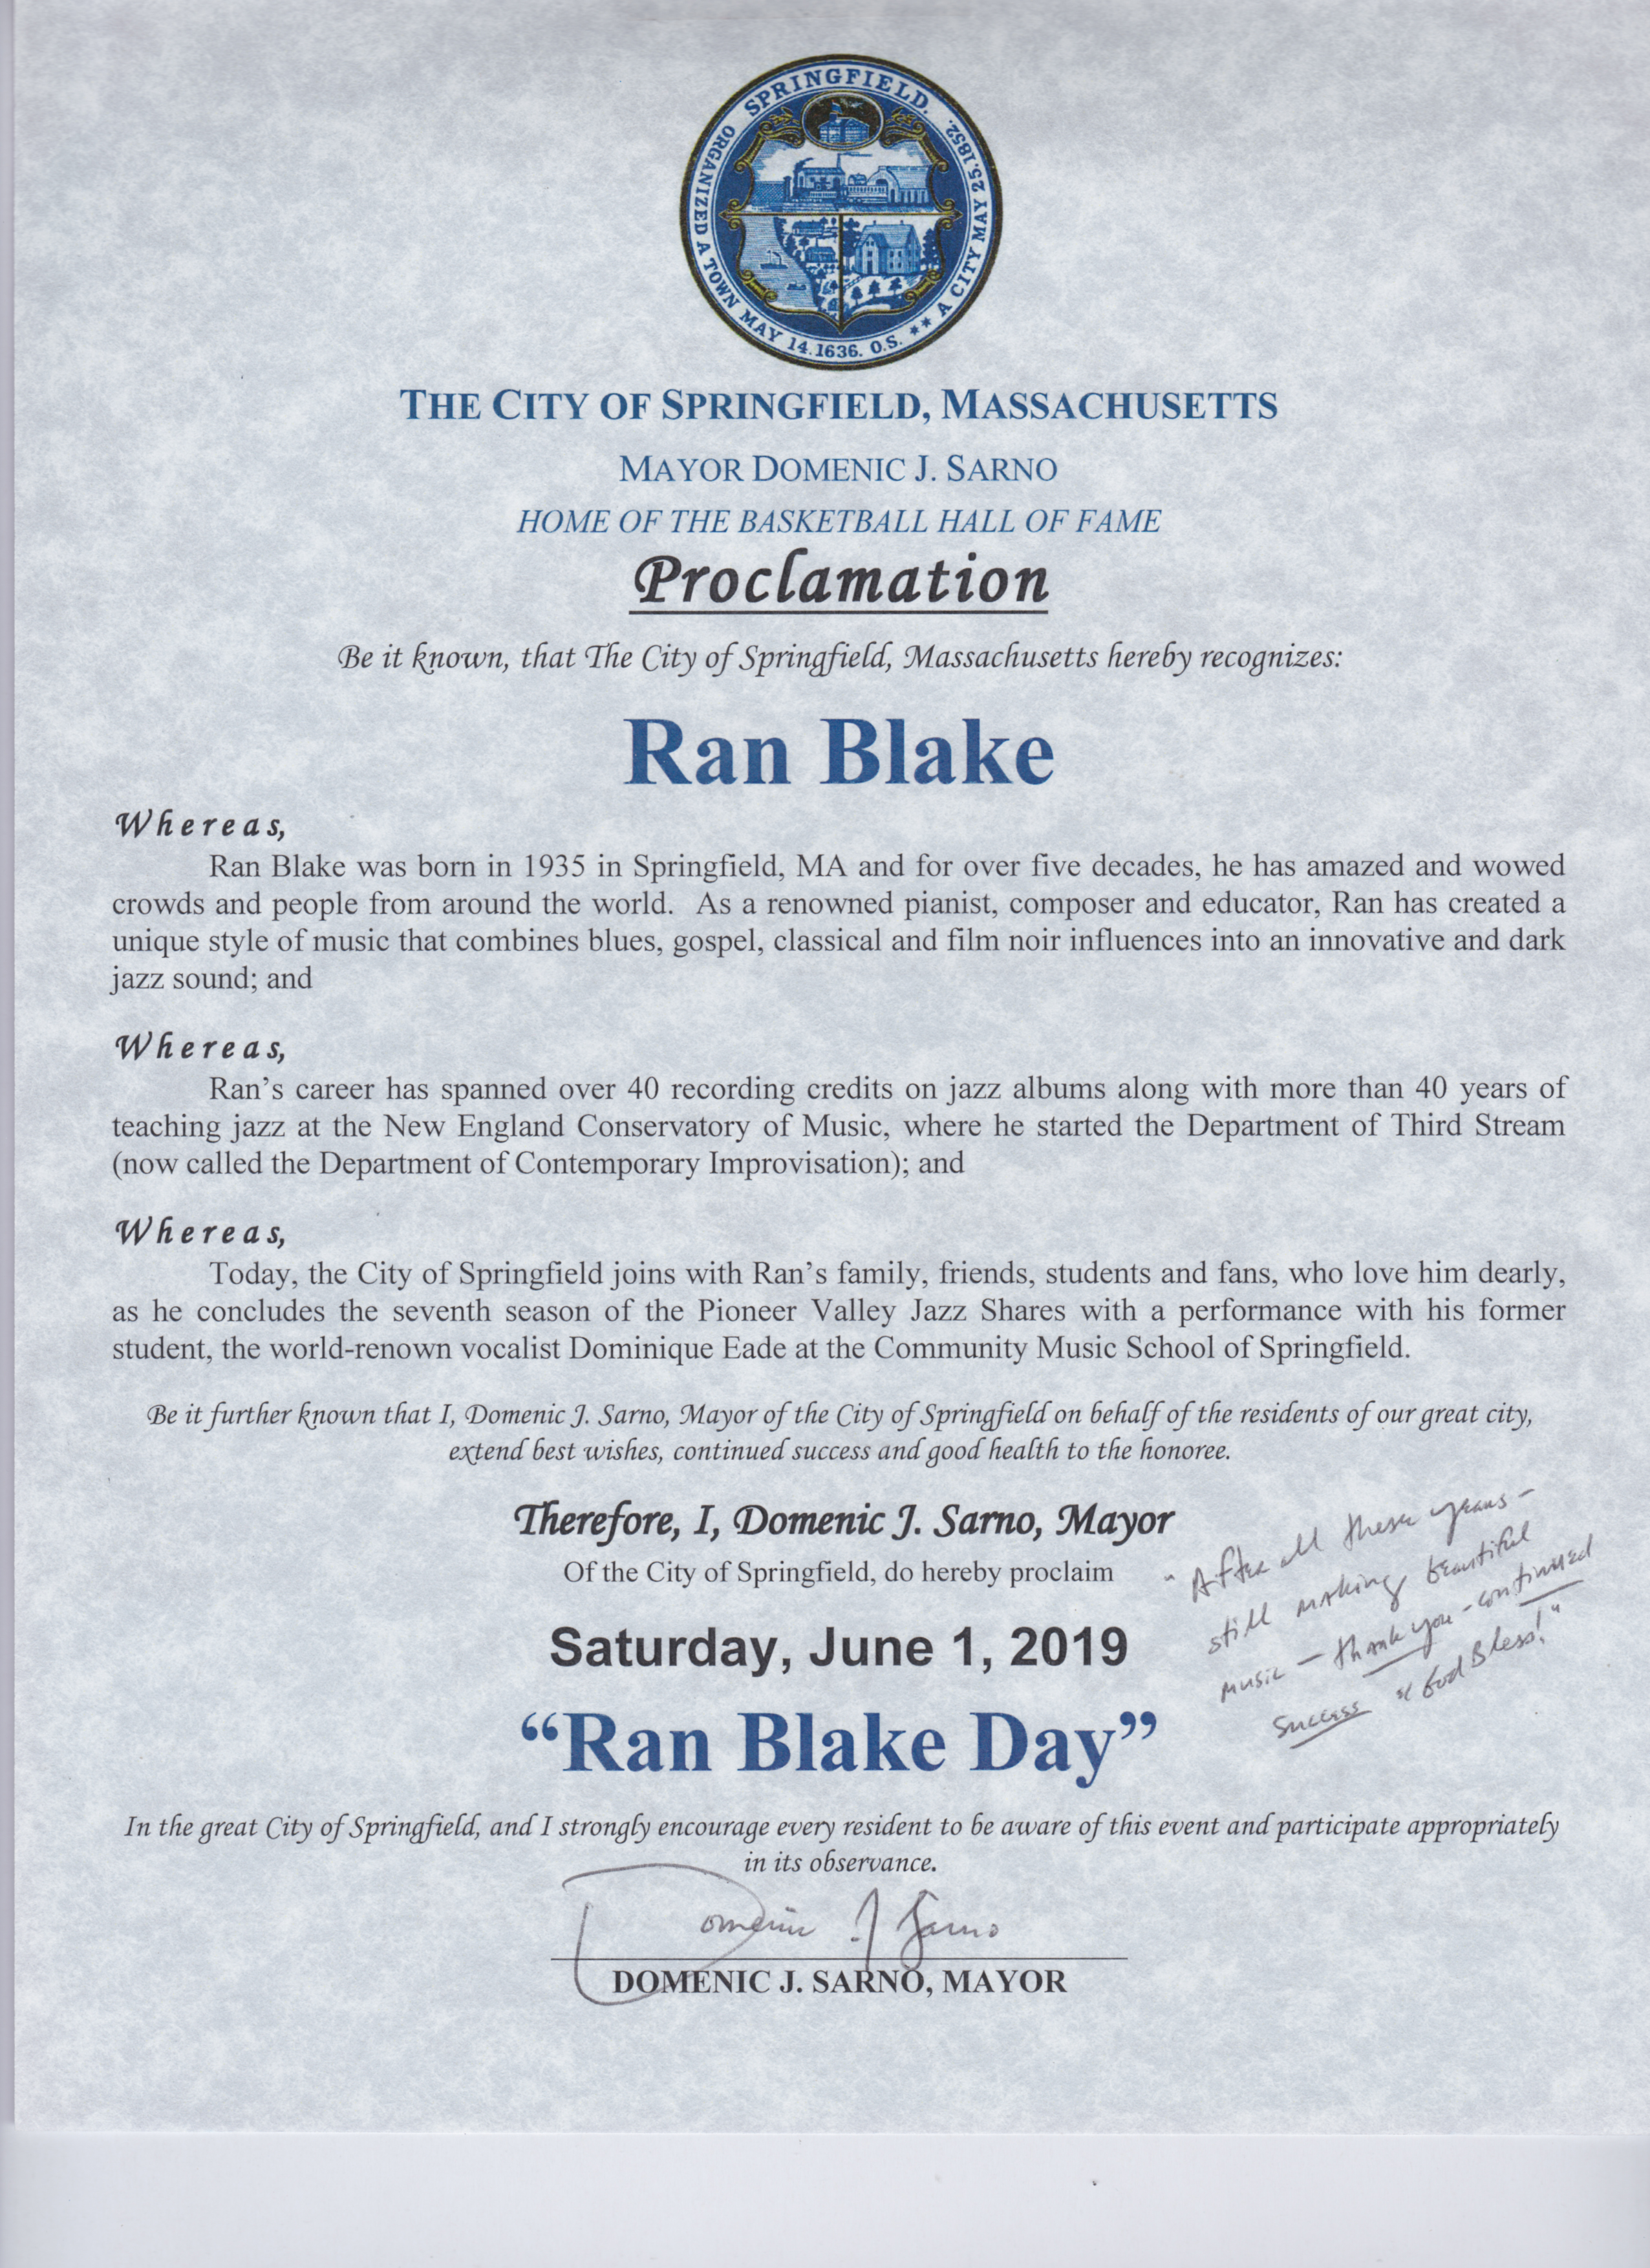 A declaration of "Ran Blake Day" from the Mayor of Springfield